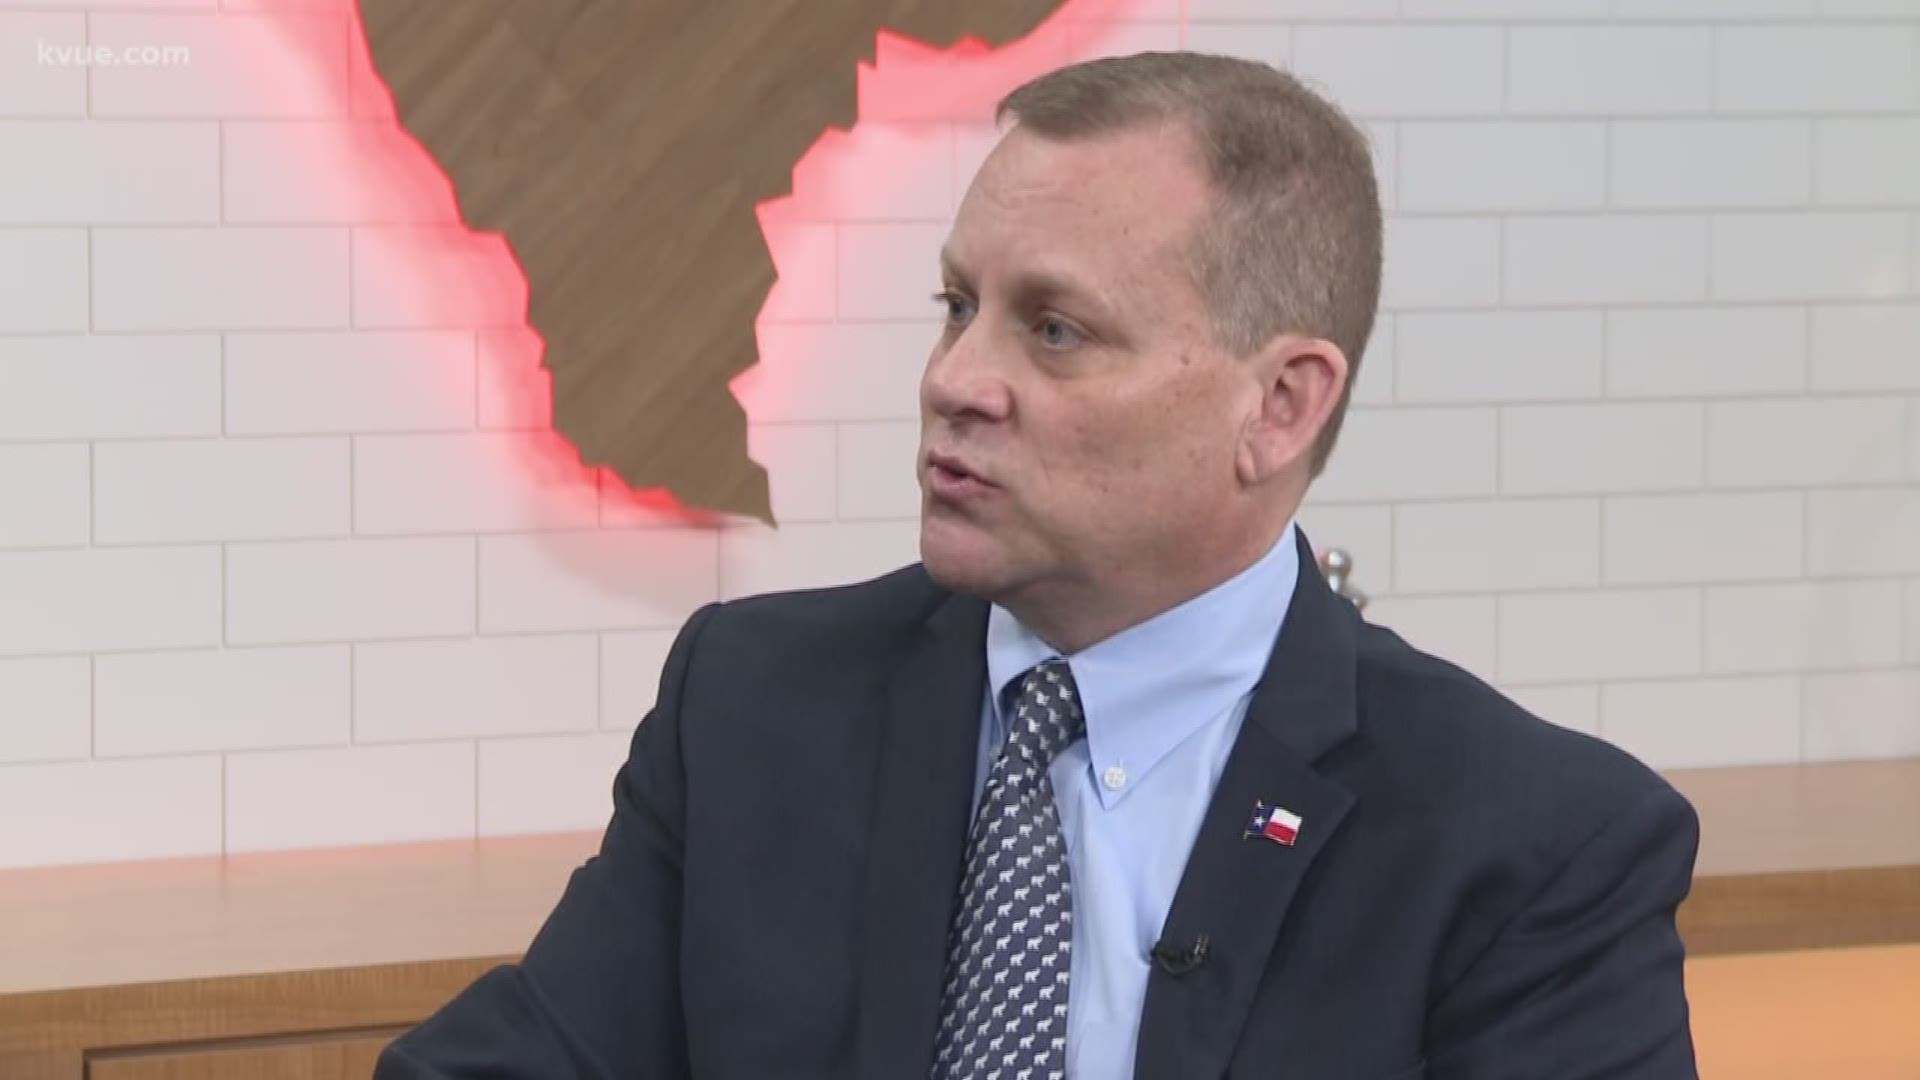 This Tuesday, early voting begins in the first primary election in the country -- The Texas primary. In Texas This Week, KVUE sits down with Republican Scott Milder who's challenging Lieutenant Governor Dan Patrick.